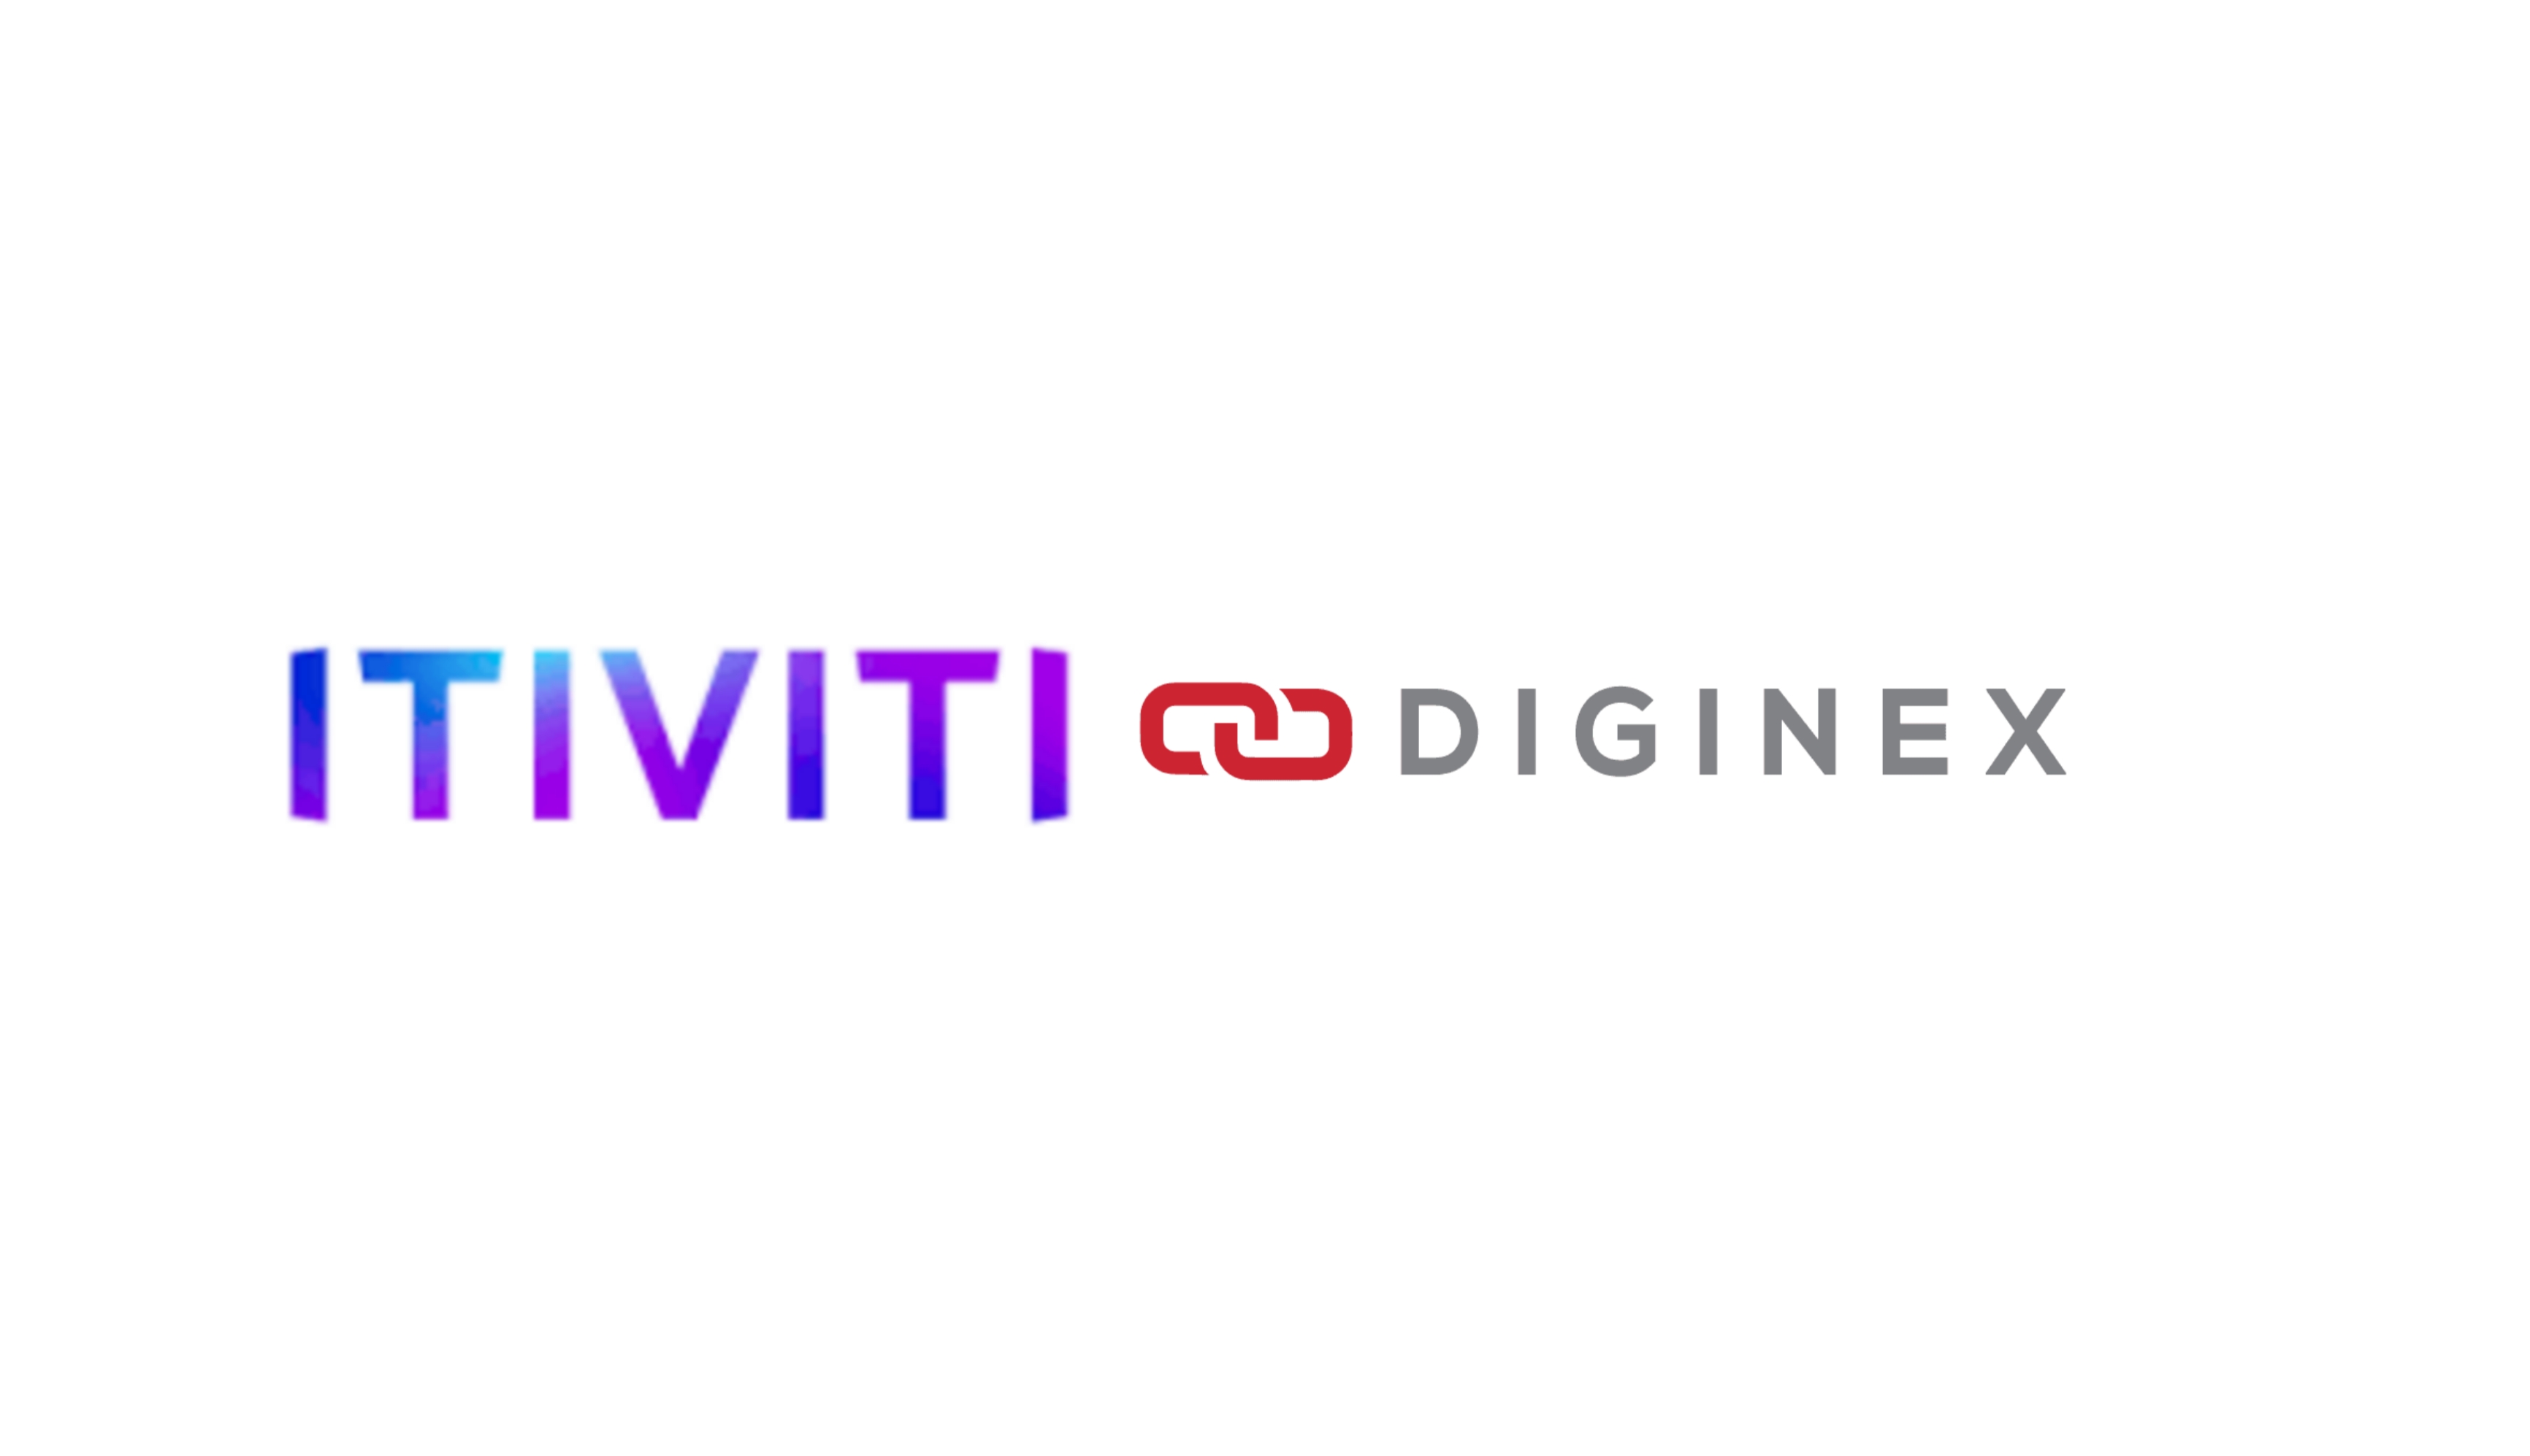 Diginex Launches Front-to-Back Digital Assets Trading, Portfolio Management and Risk Platform Powered by Itiviti